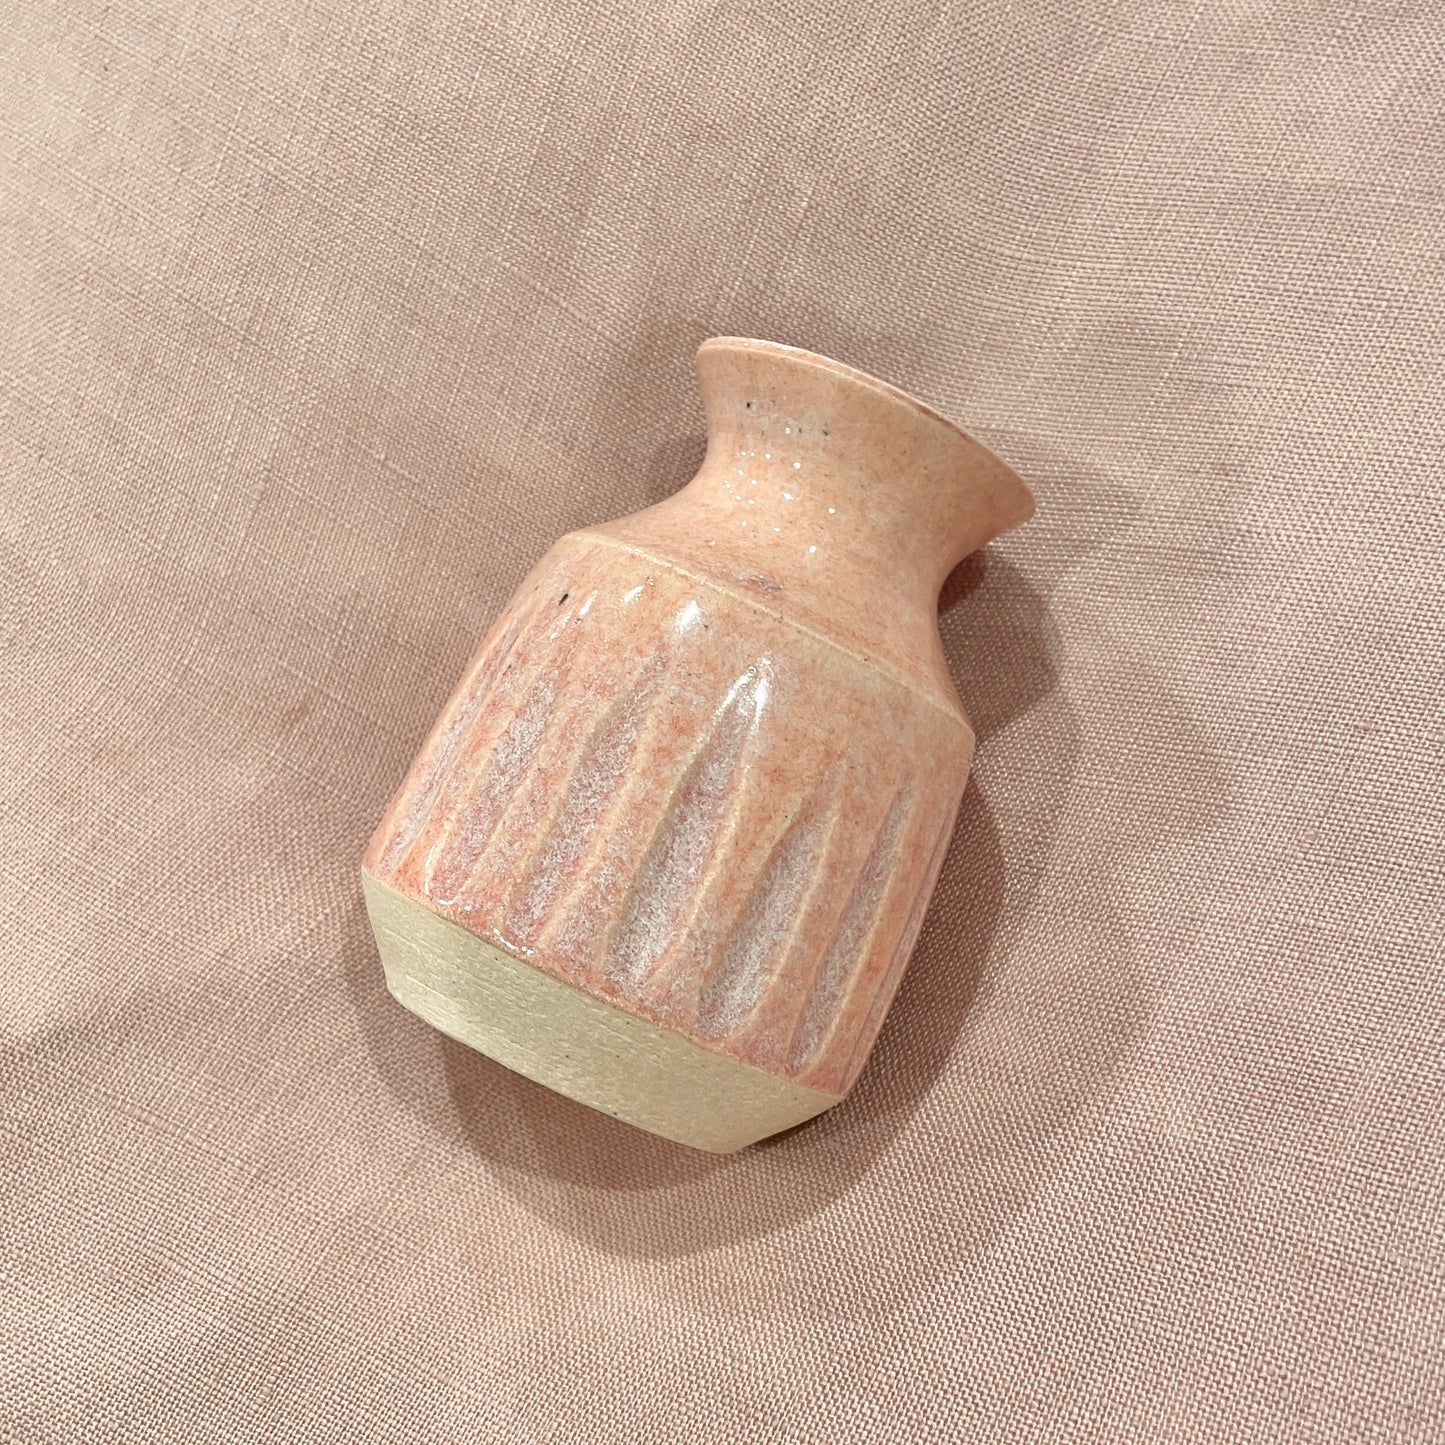 Small Pink Vase 1